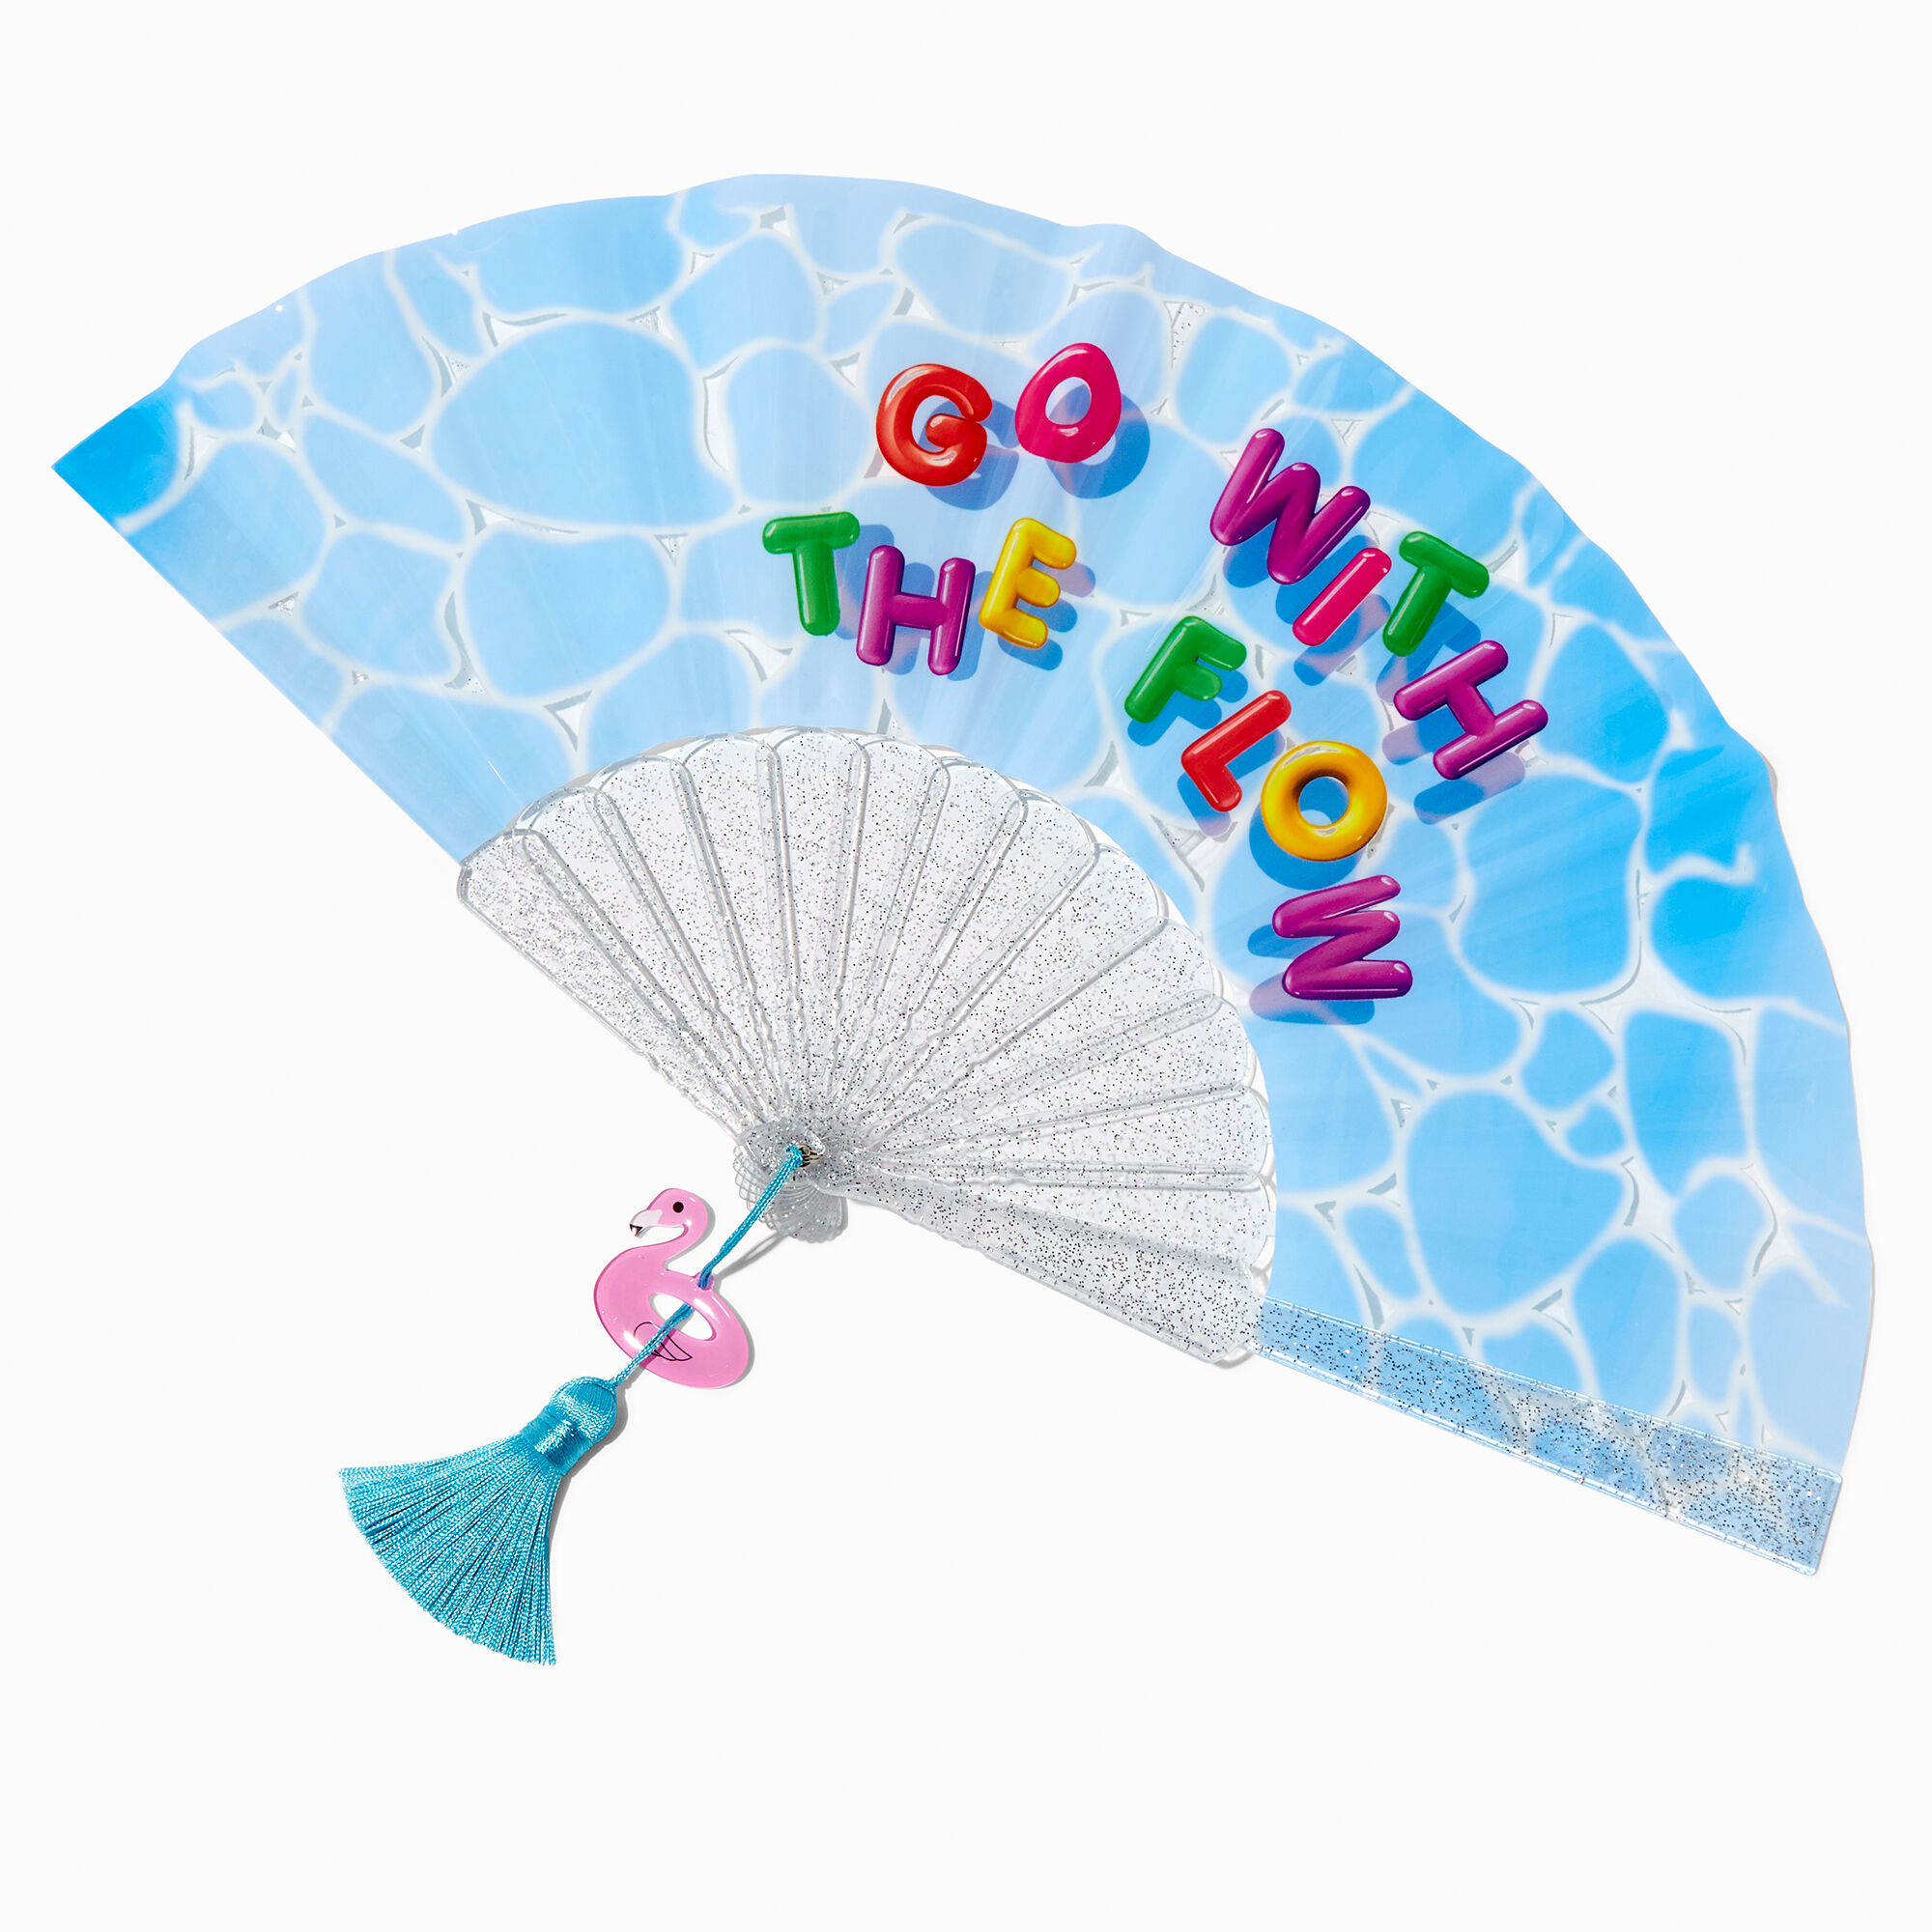 View Claires Go With The Flow Poolside Fan information